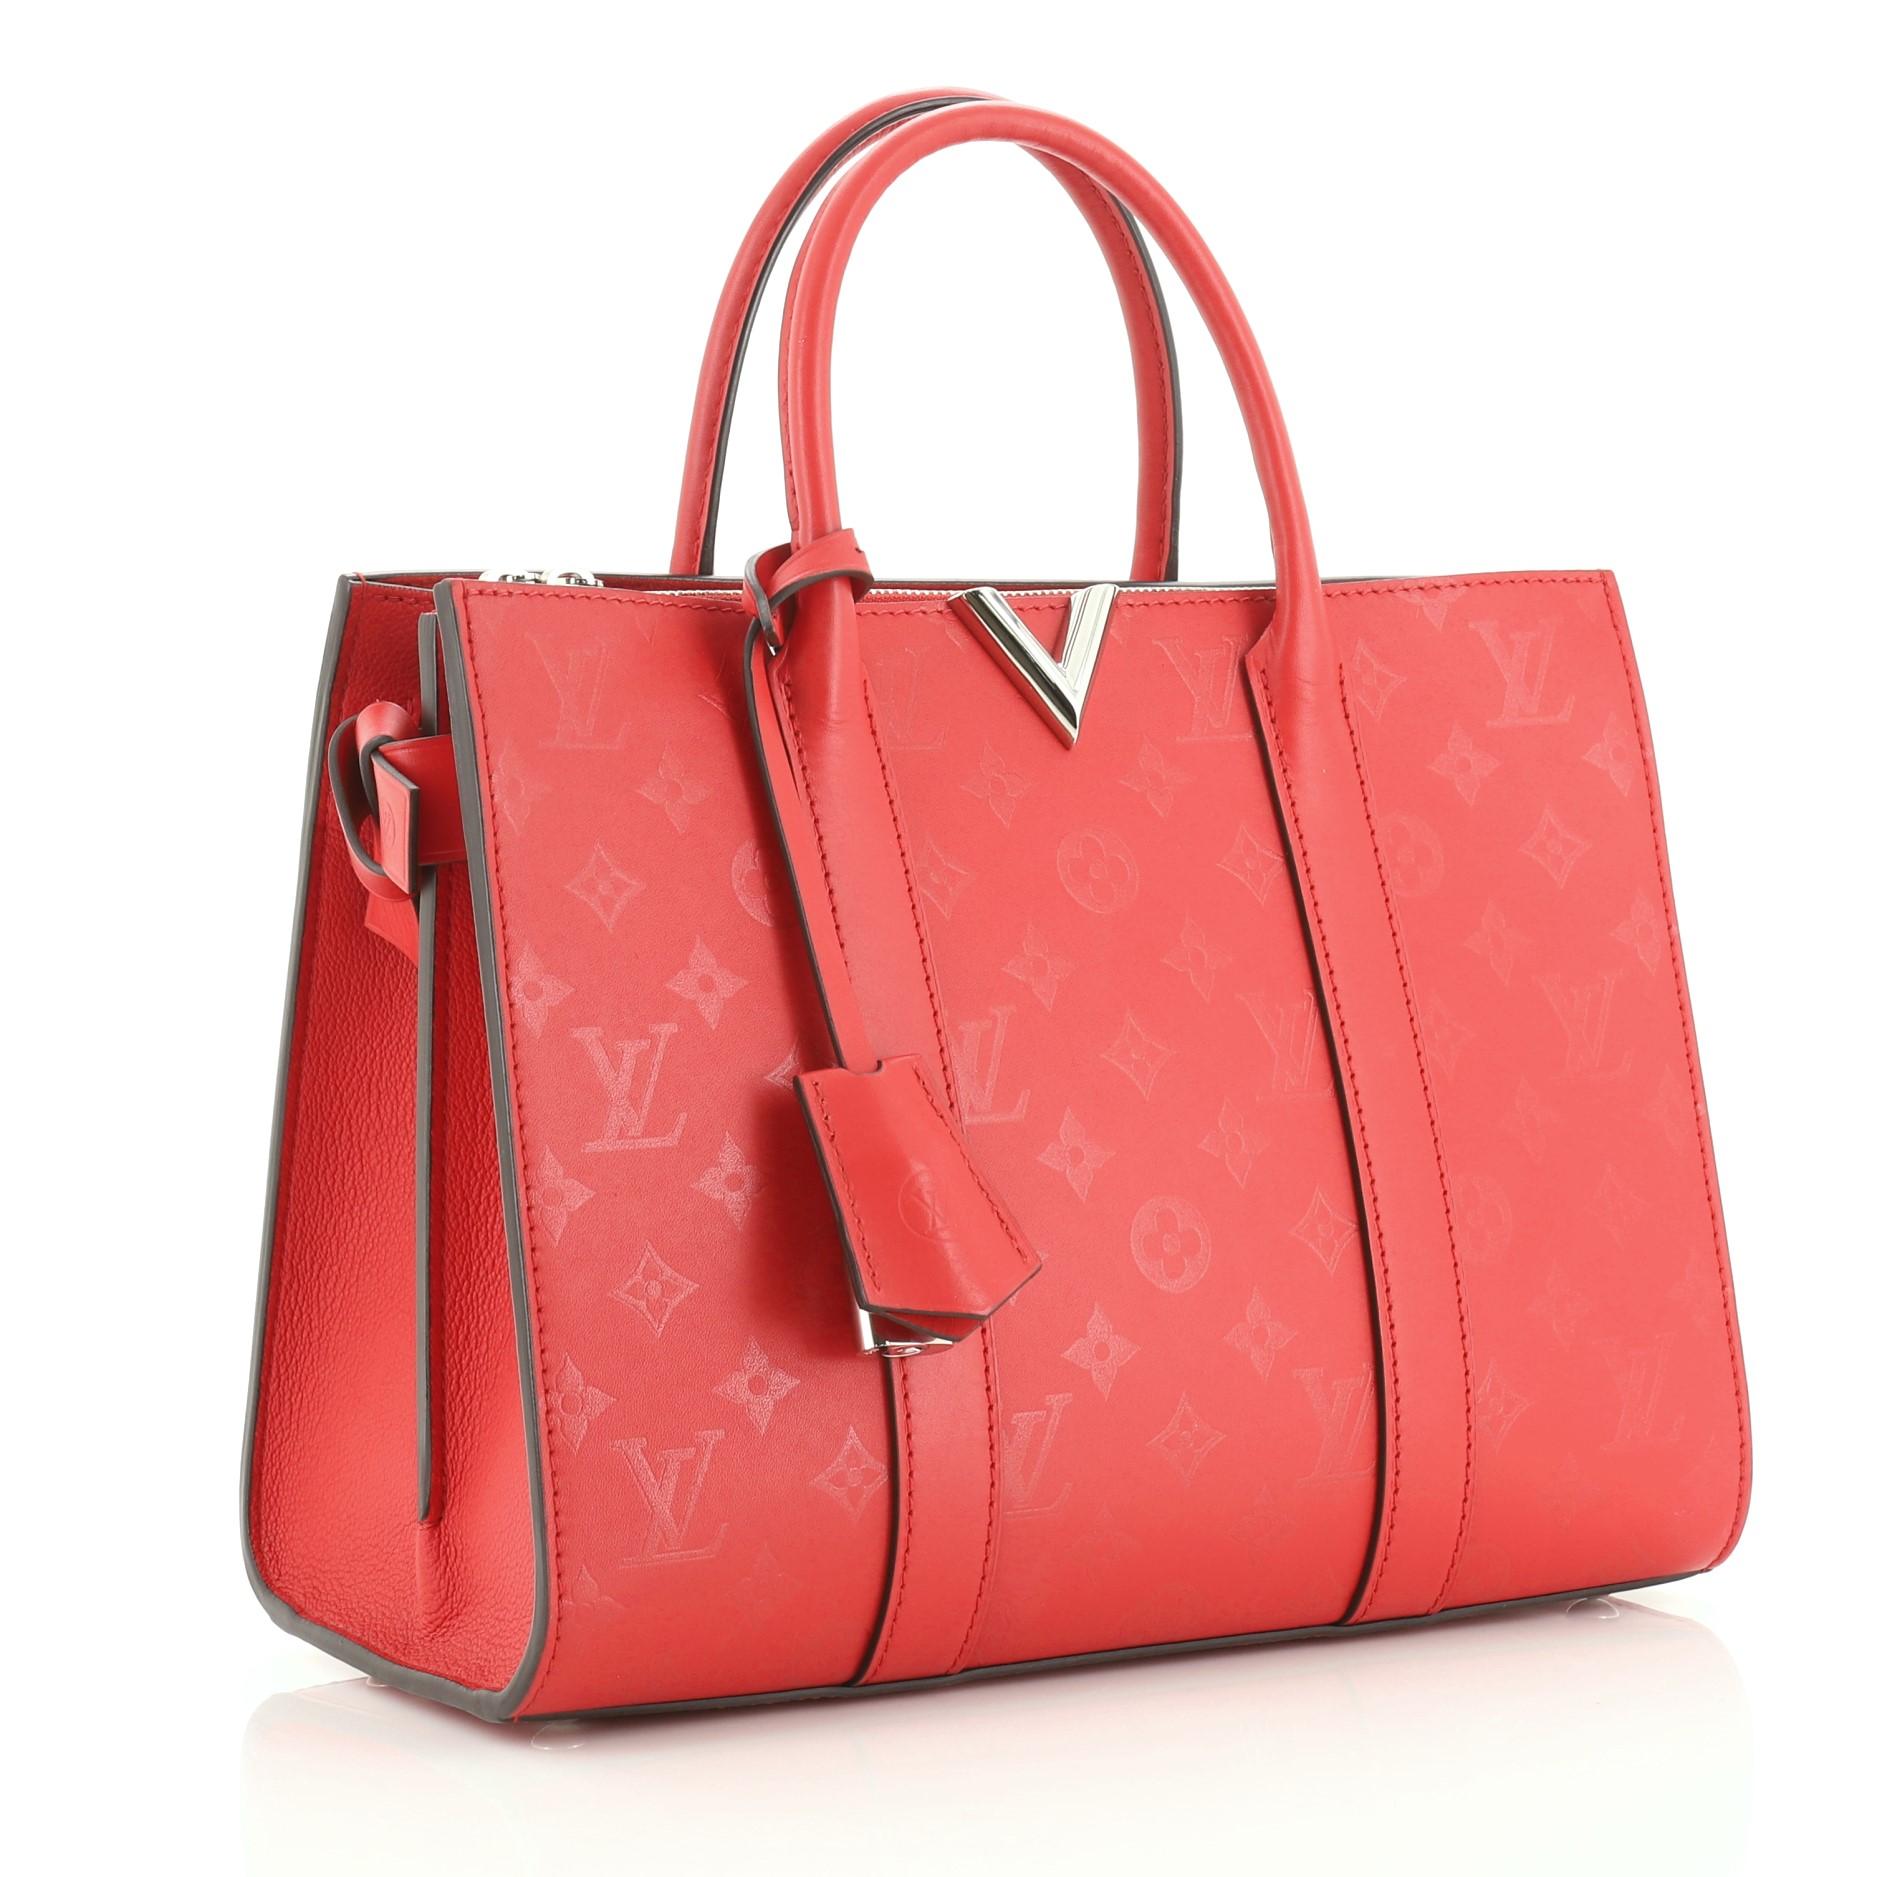 This Louis Vuitton Very Tote Monogram Leather MM, crafted in red monogram leather, features dual rolled handles and silver-tone hardware. It opens to a red microfiber interior with middle zip compartment. Authenticity code reads: DR4187.

Estimated